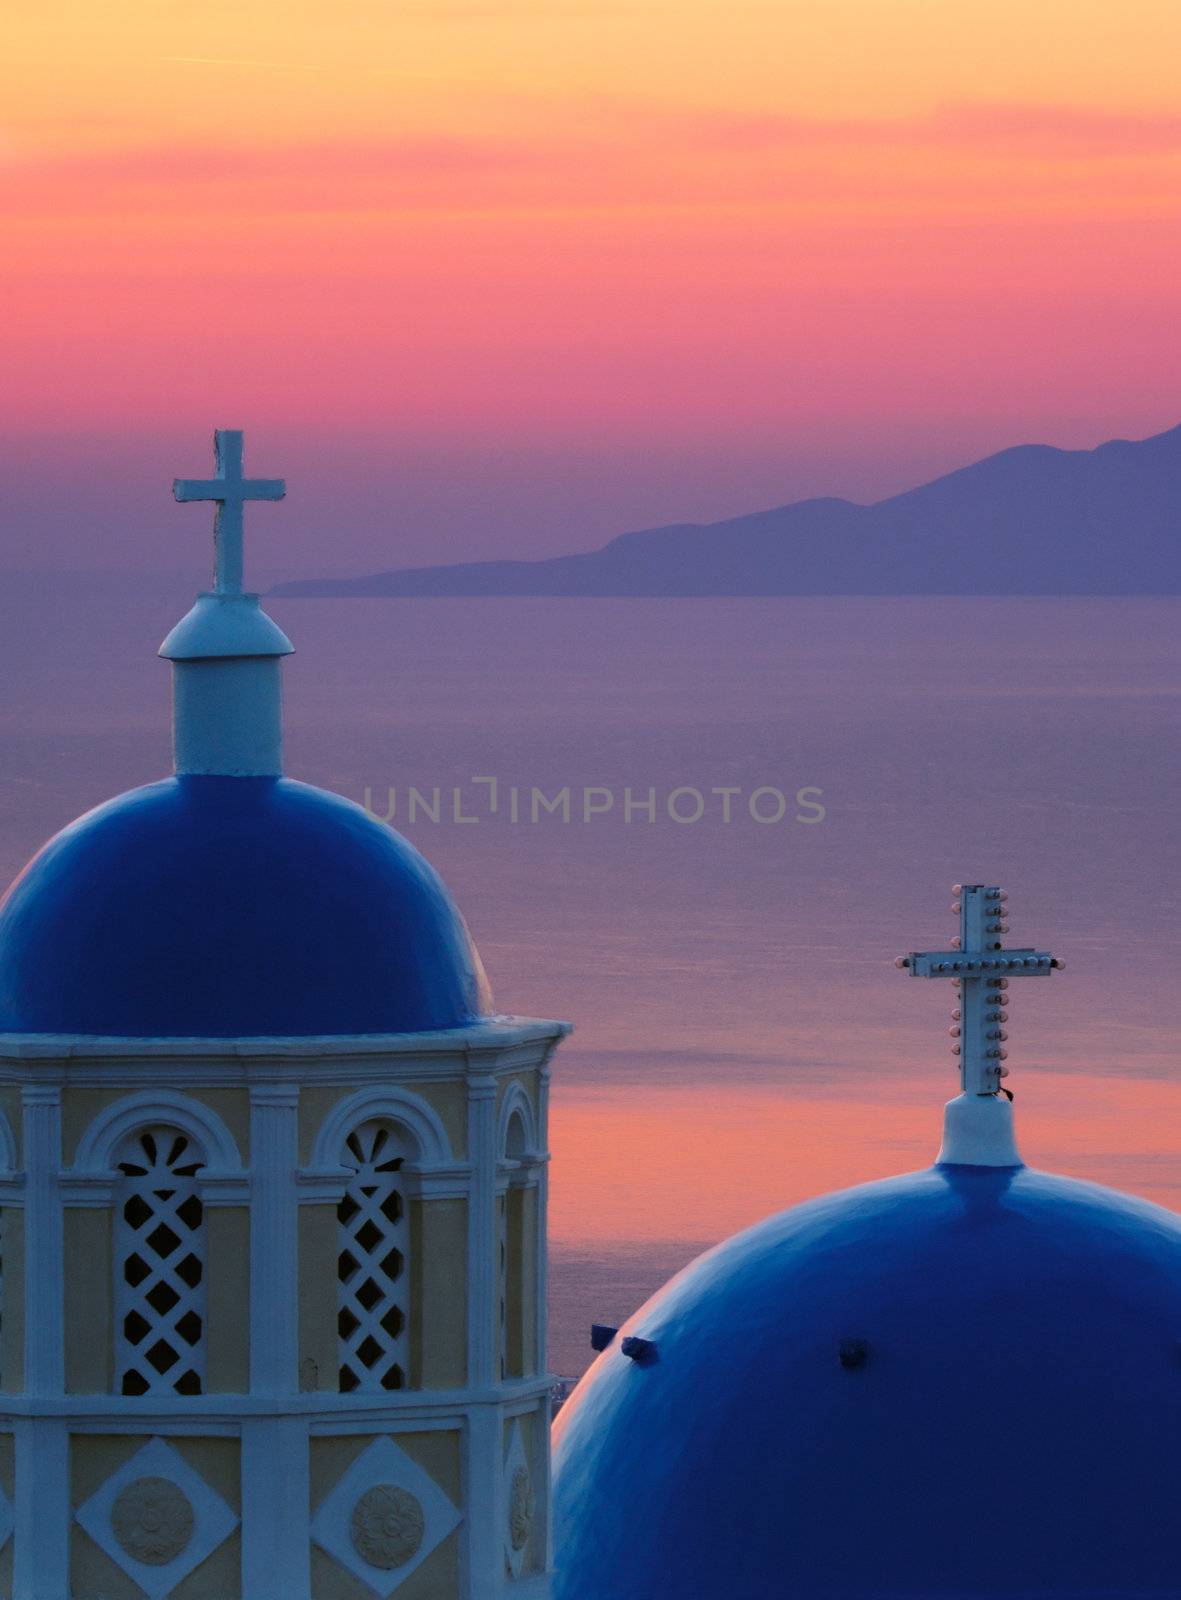 Image shows two church domes, typical of Santorini, against the Aegean Sea, washed in pre-sunrise colors